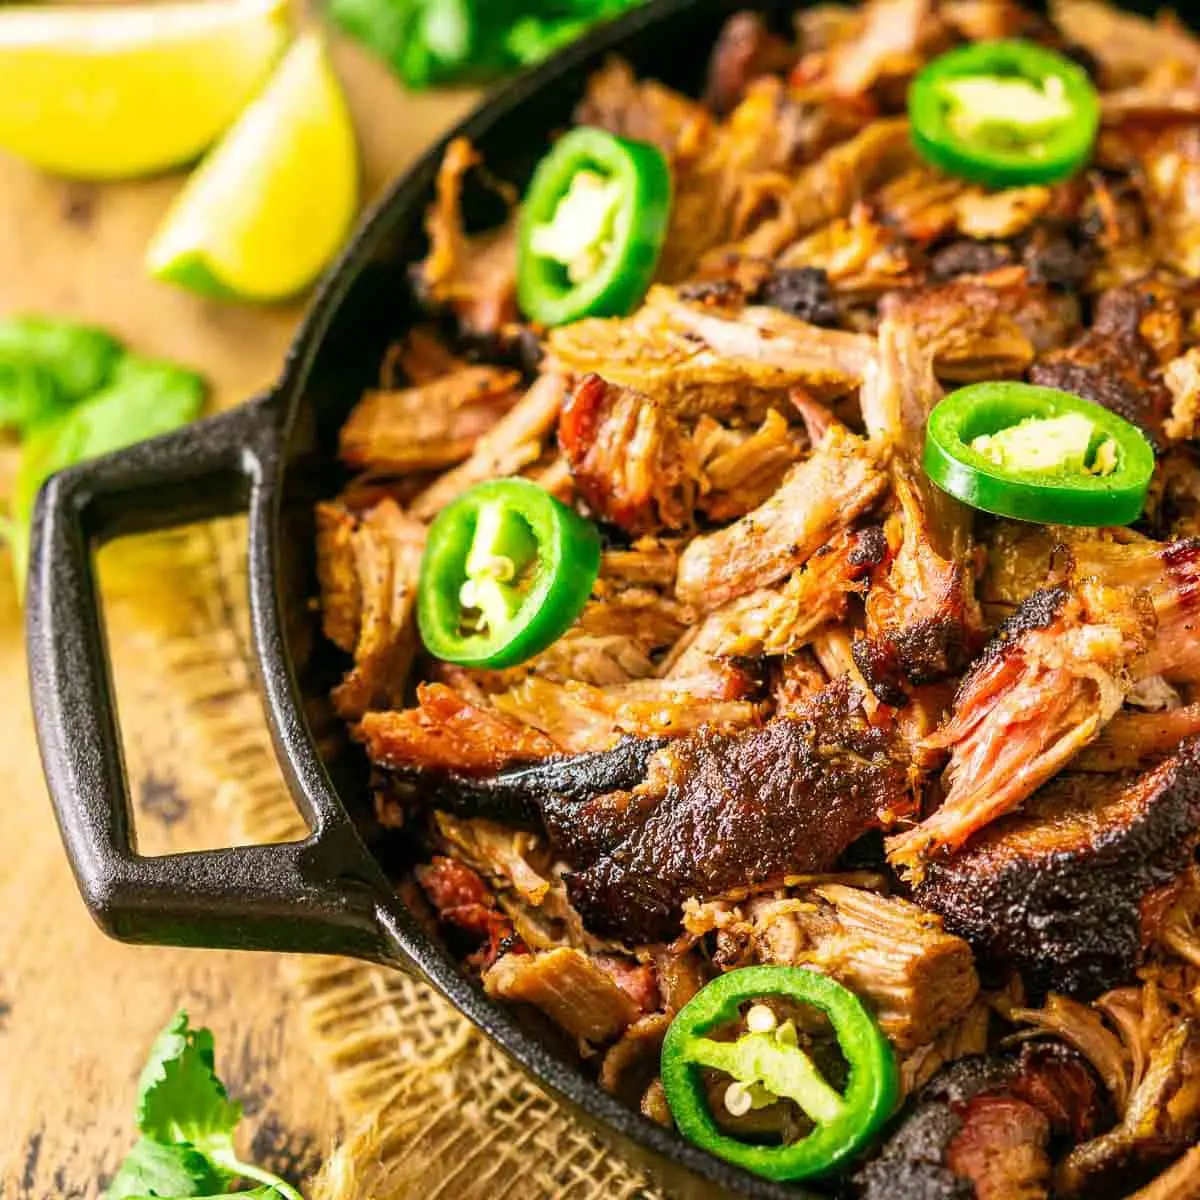 authentic smoked carnitas recipe - What is authentic carnitas made from